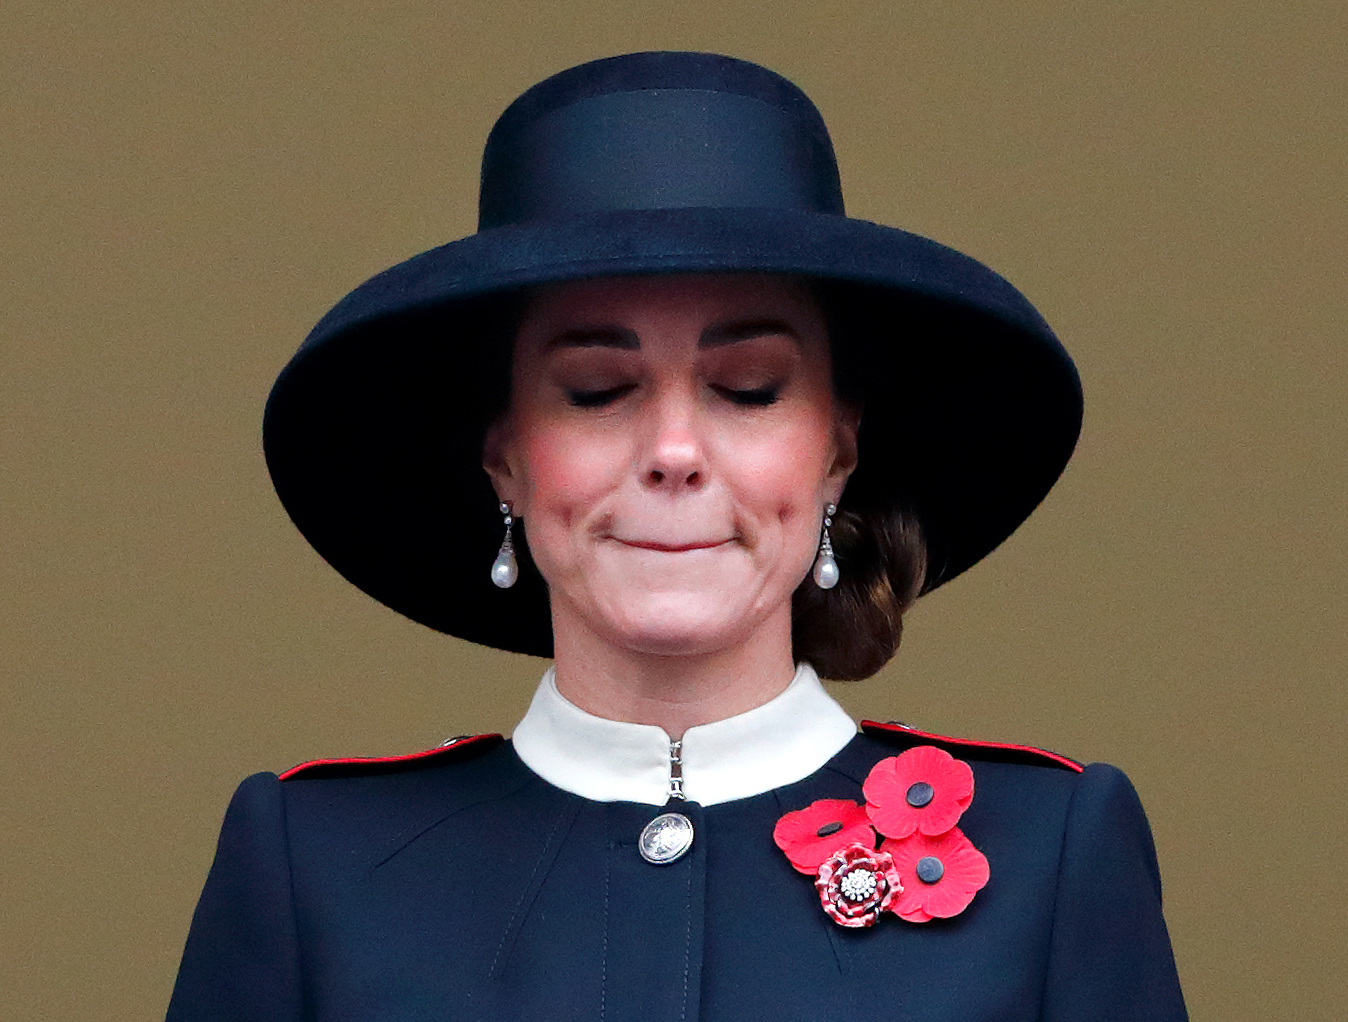 Princess Catherine at the annual Remembrance Sunday service at The Cenotaph in London, England on November 14, 2021 | Source: Getty Images